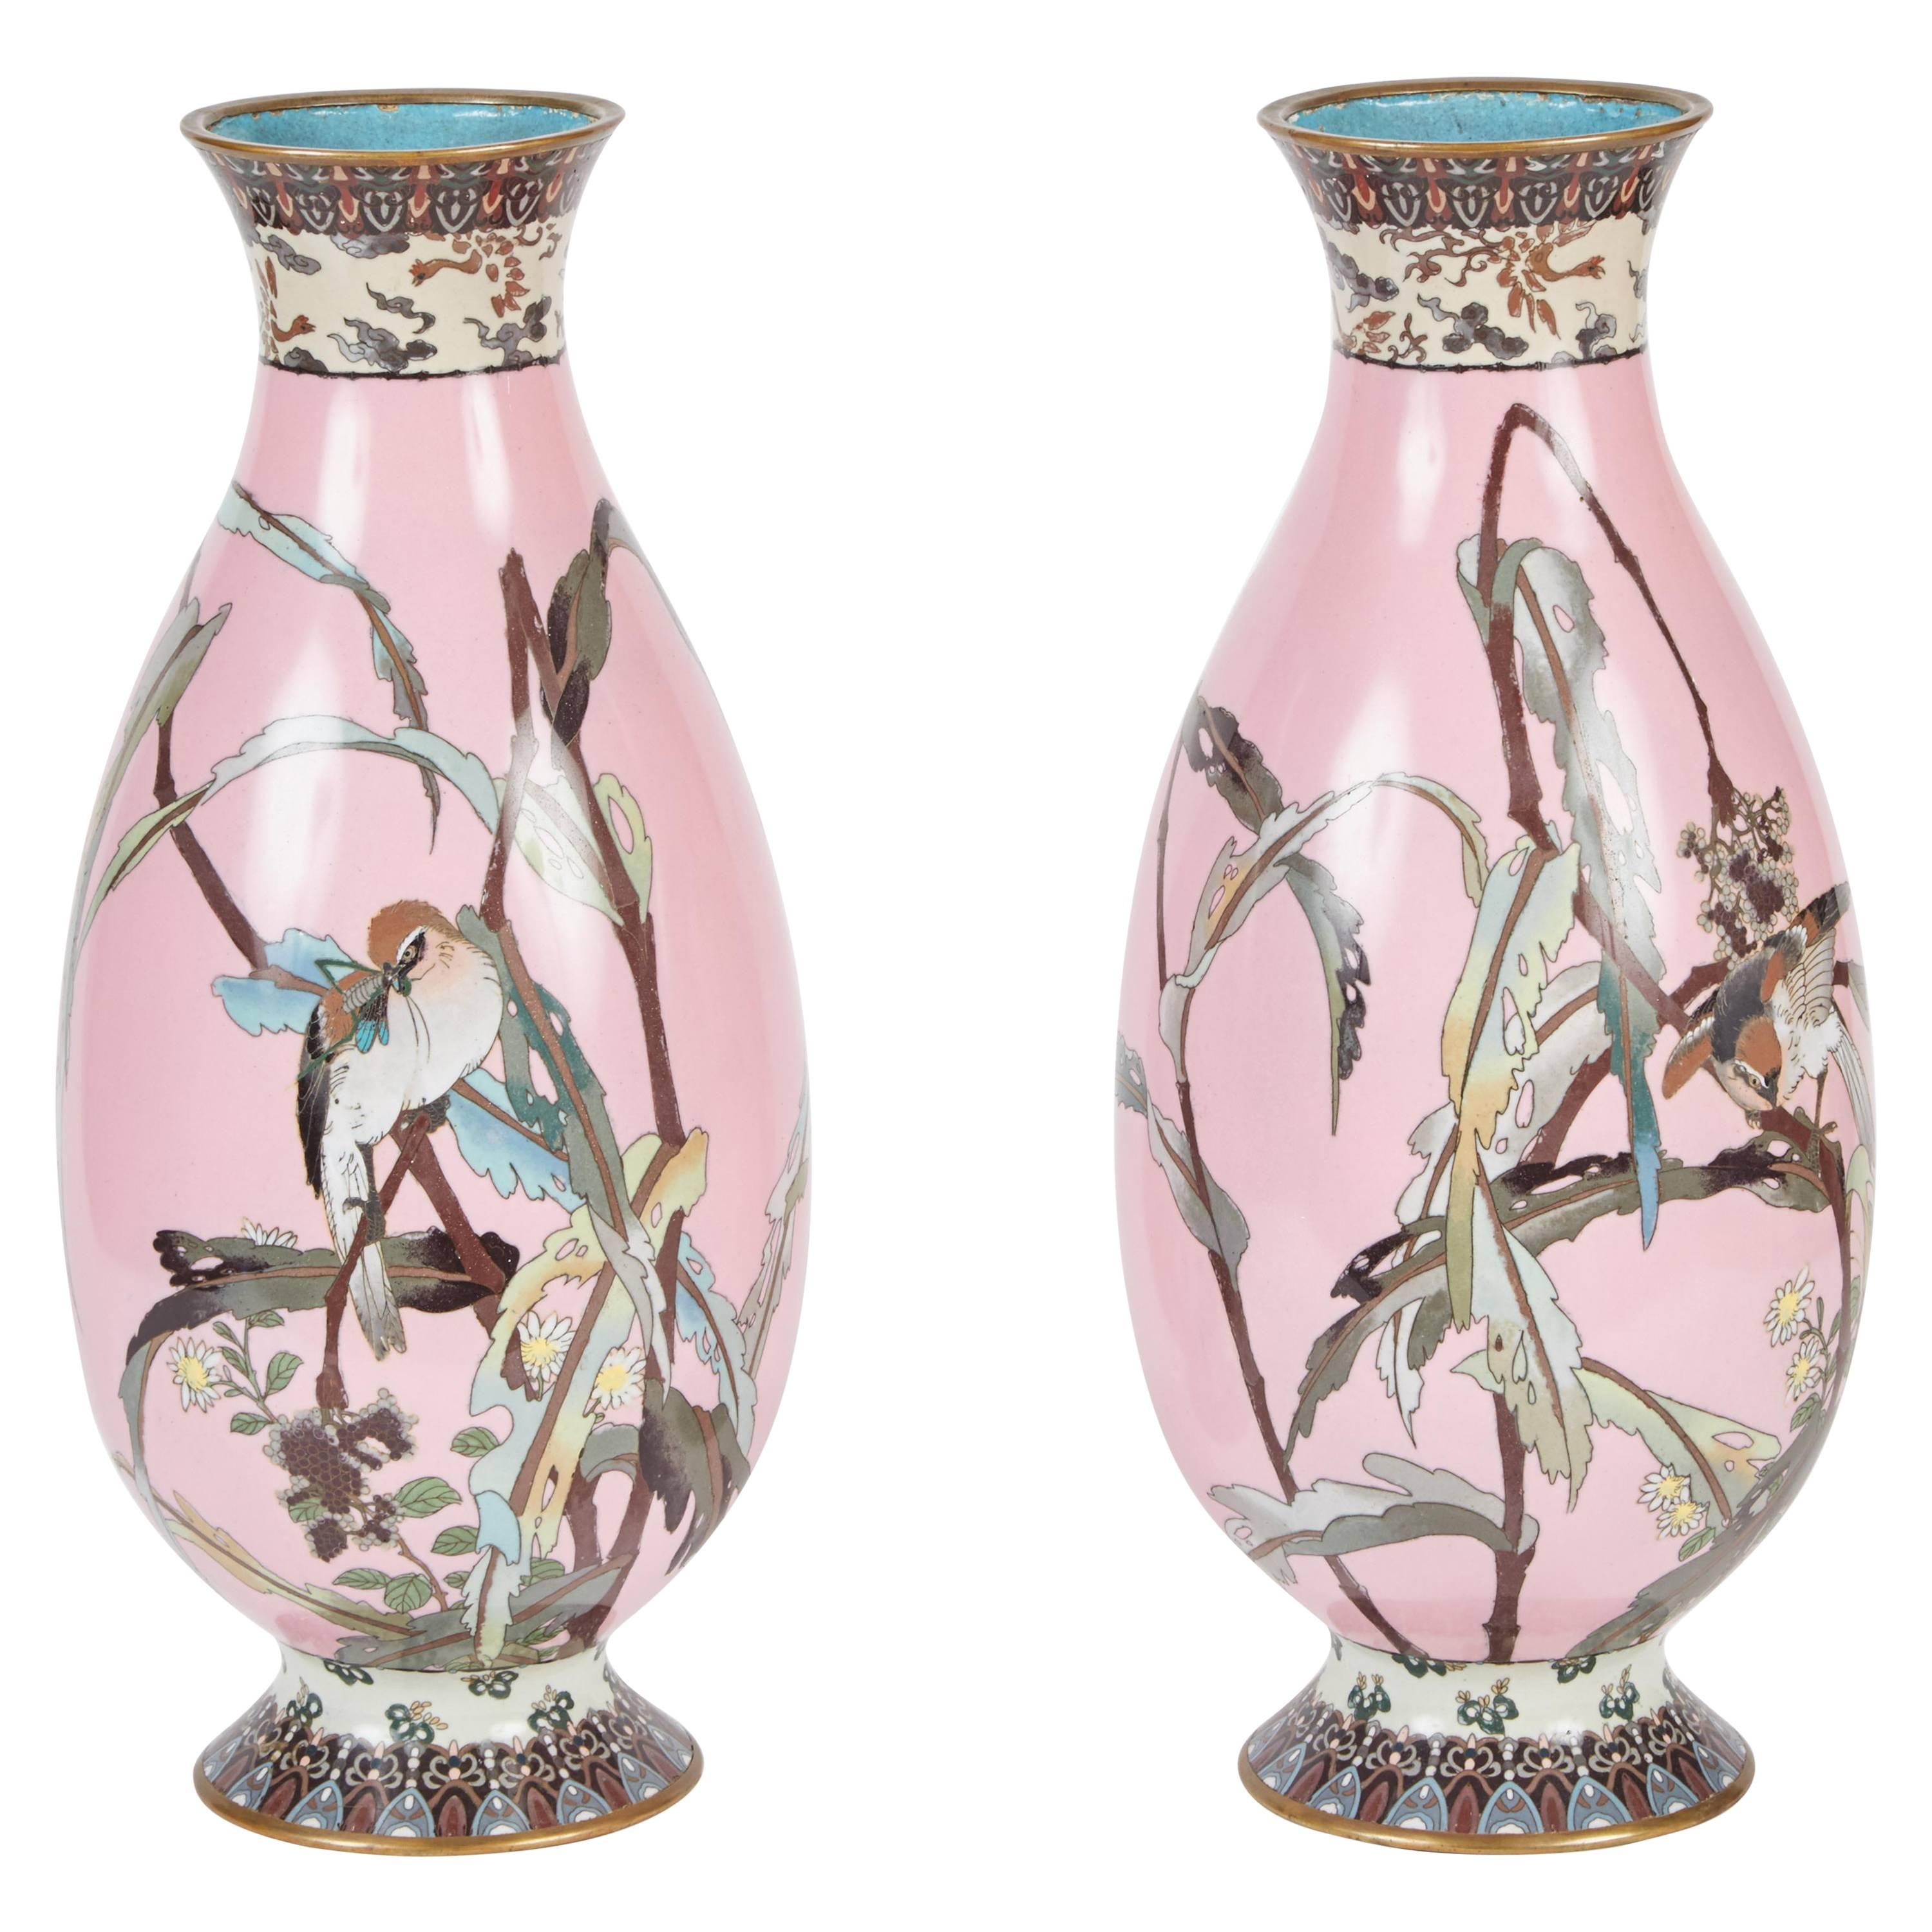 Rare Pair of Japanese Late 19th Century Pink Cloisonné Vases